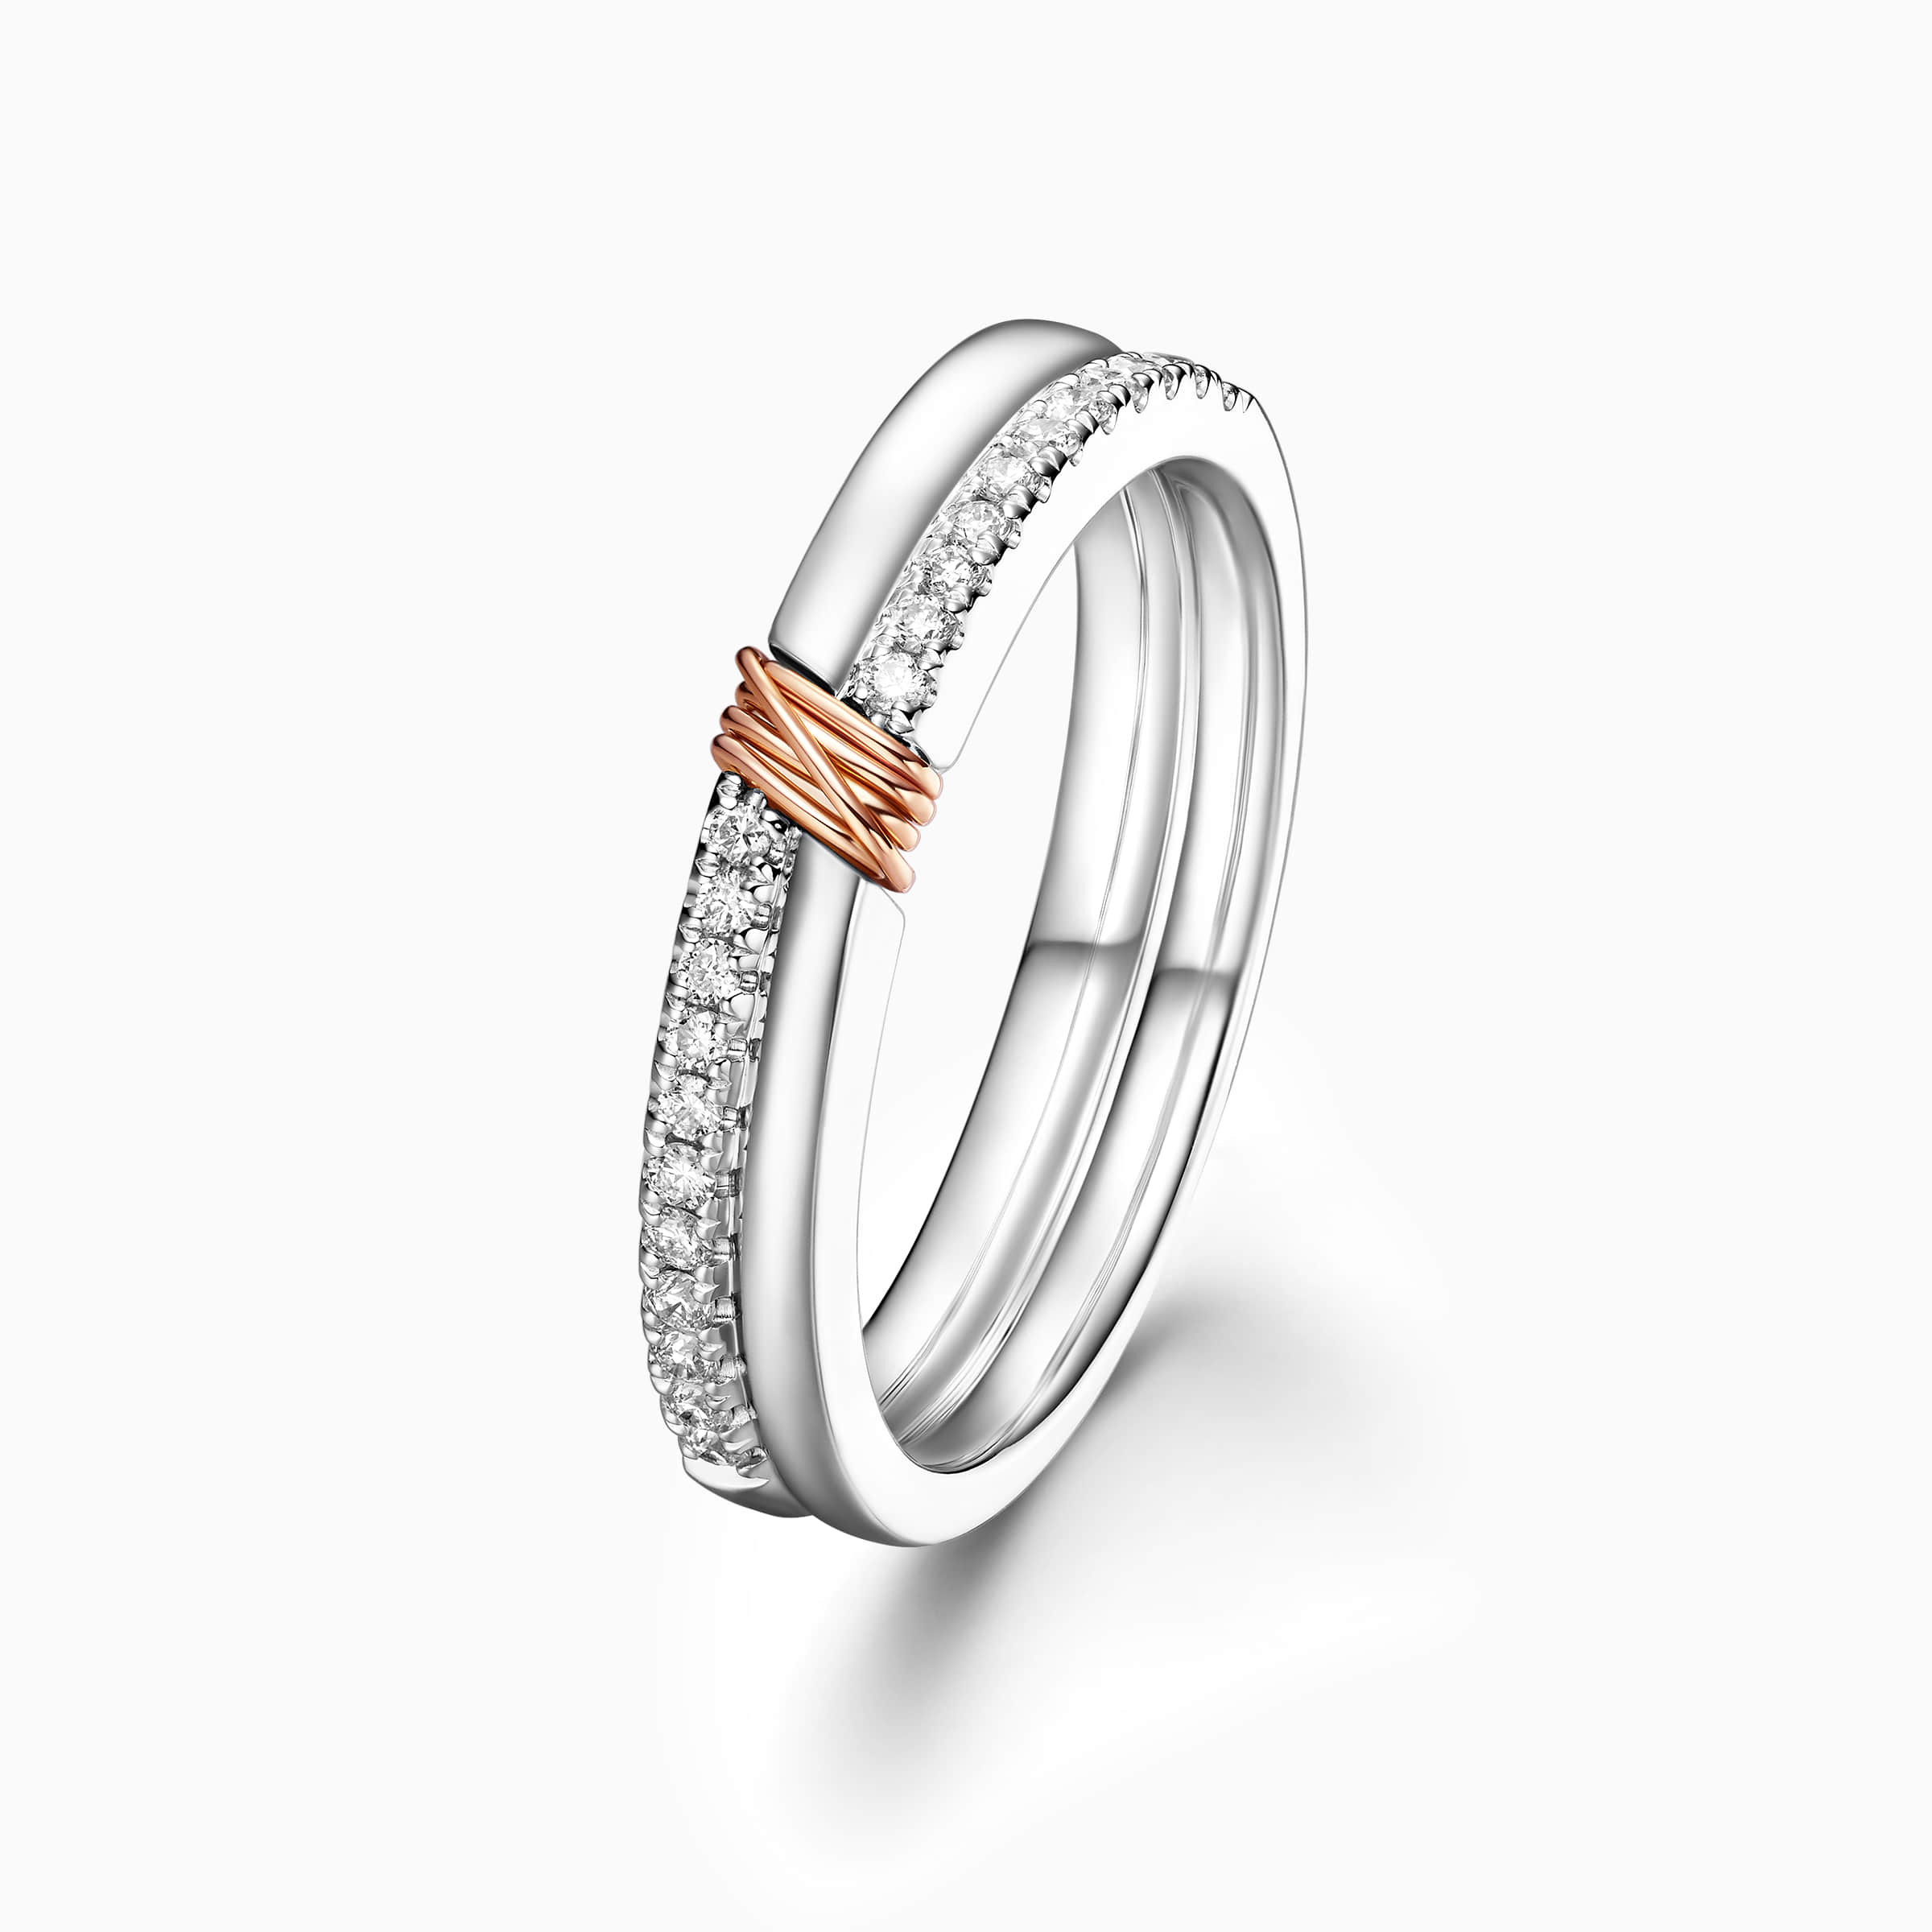 Darry Ring unique two toned wedding ring for women